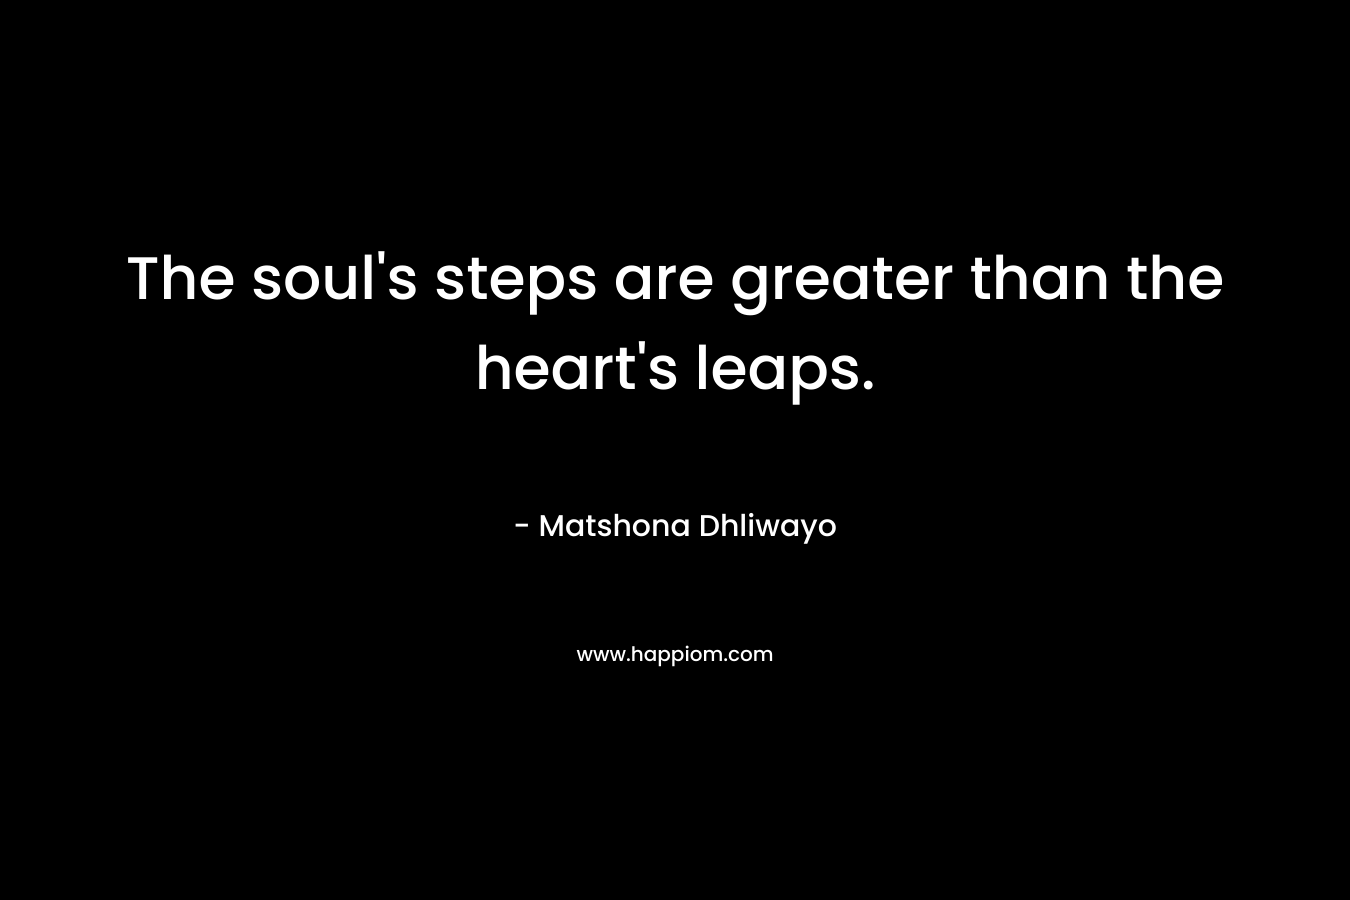 The soul's steps are greater than the heart's leaps.